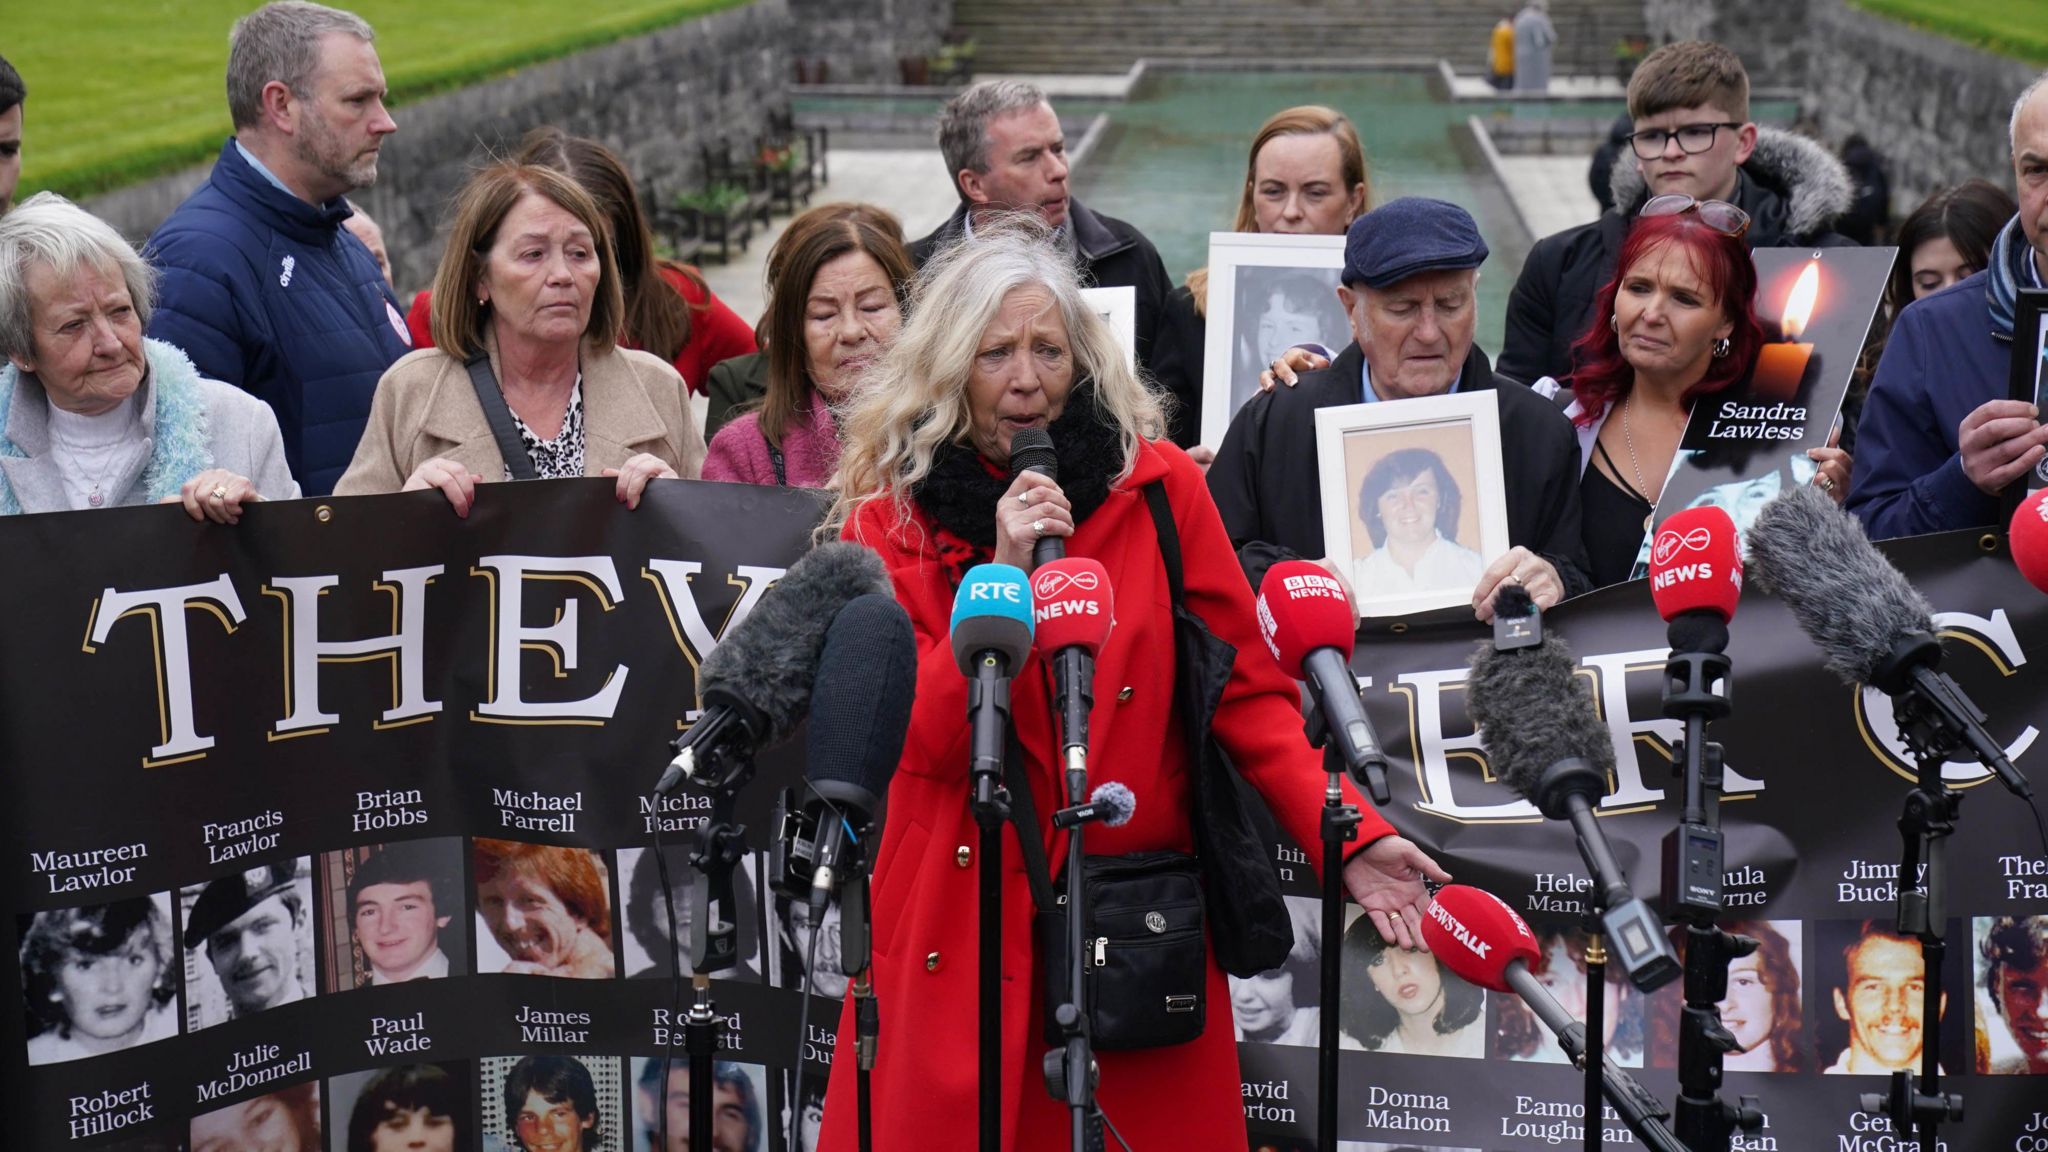 Stardust survivor Antoinette Keegan, who lost her two sisters Mary and Martina, speaking to the media in front of survivors, family members and supporters in the Garden of Remembrance in Dublin